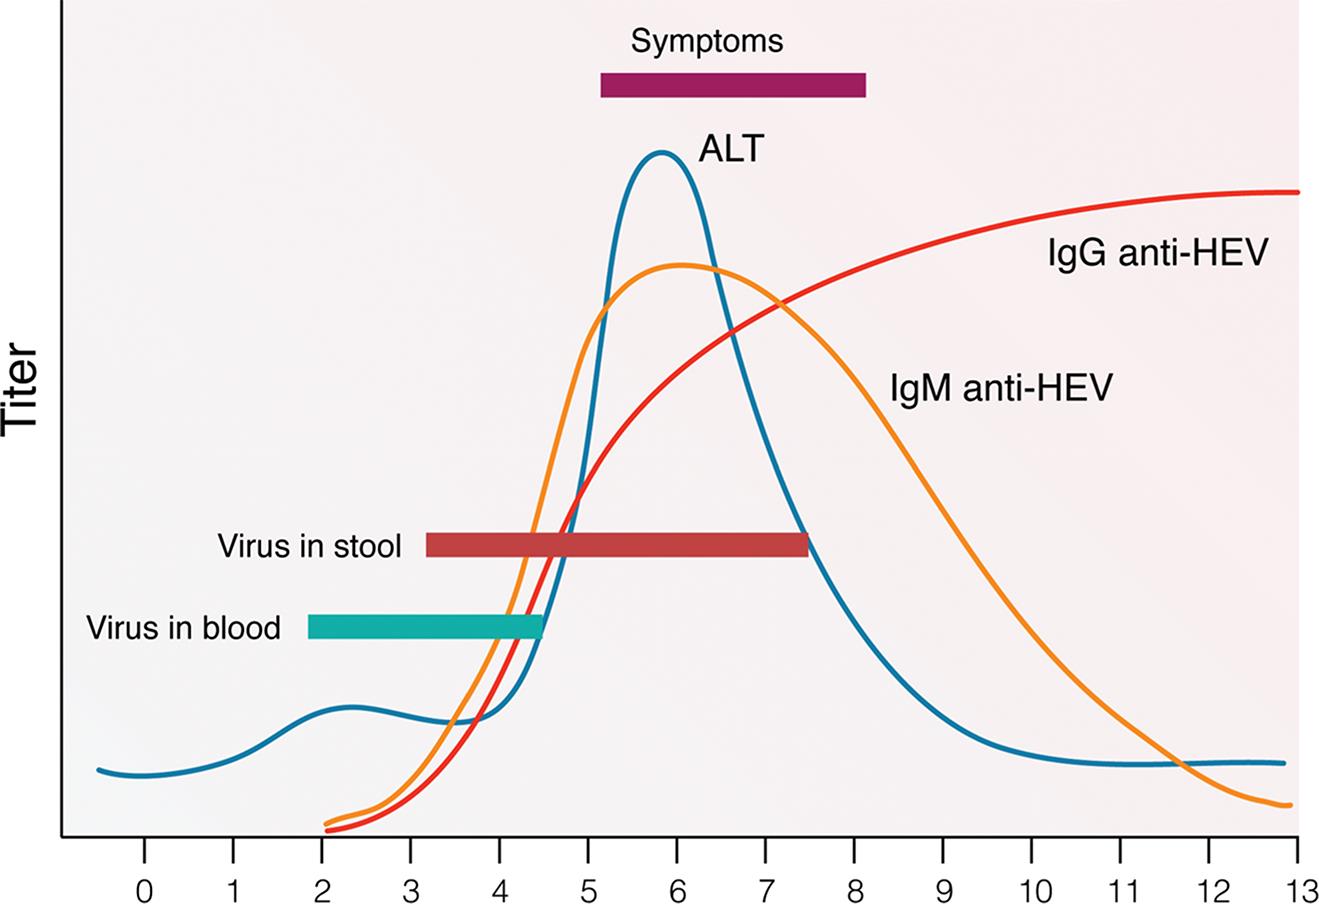 Appearance of virological markers and symptoms of HEV infection according to weeks after infection.